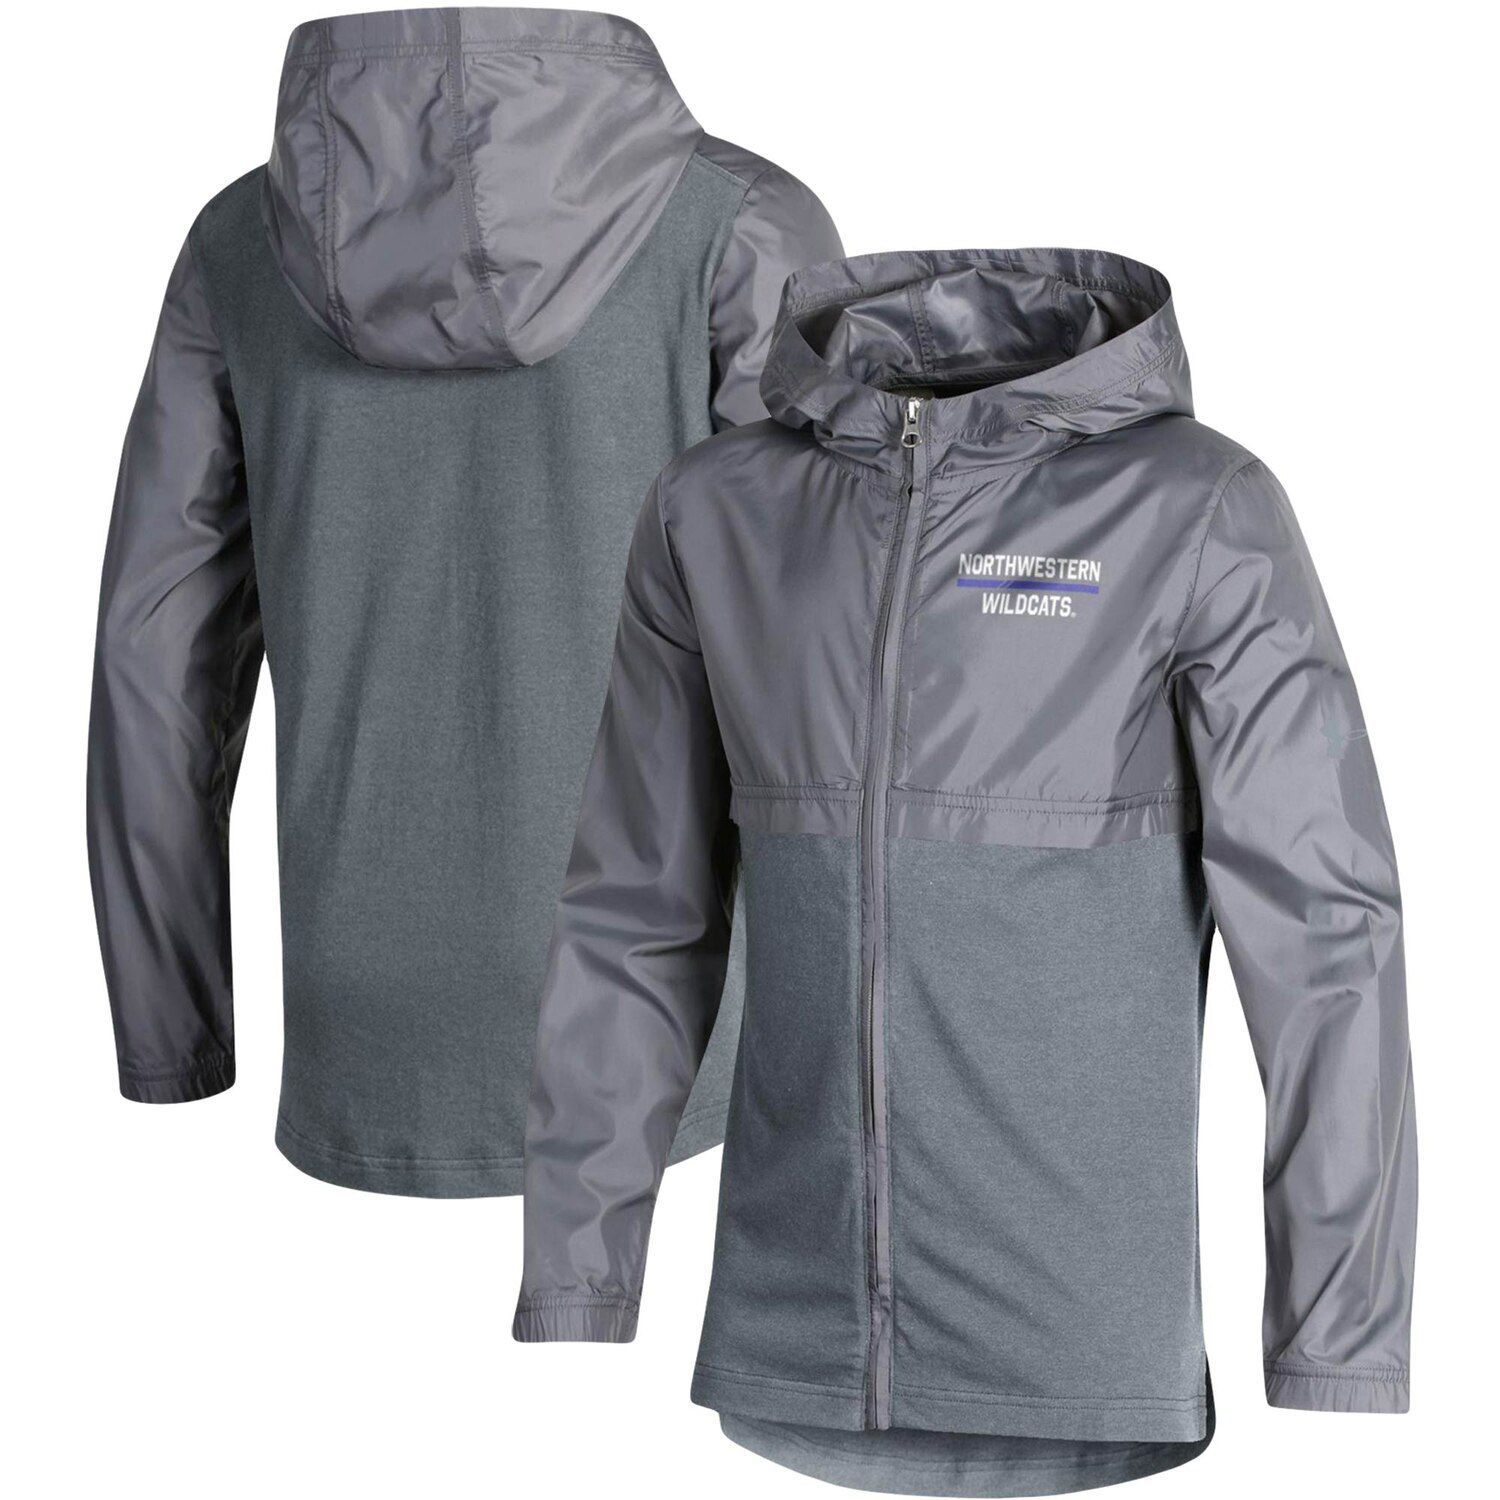 under armour youth jacket